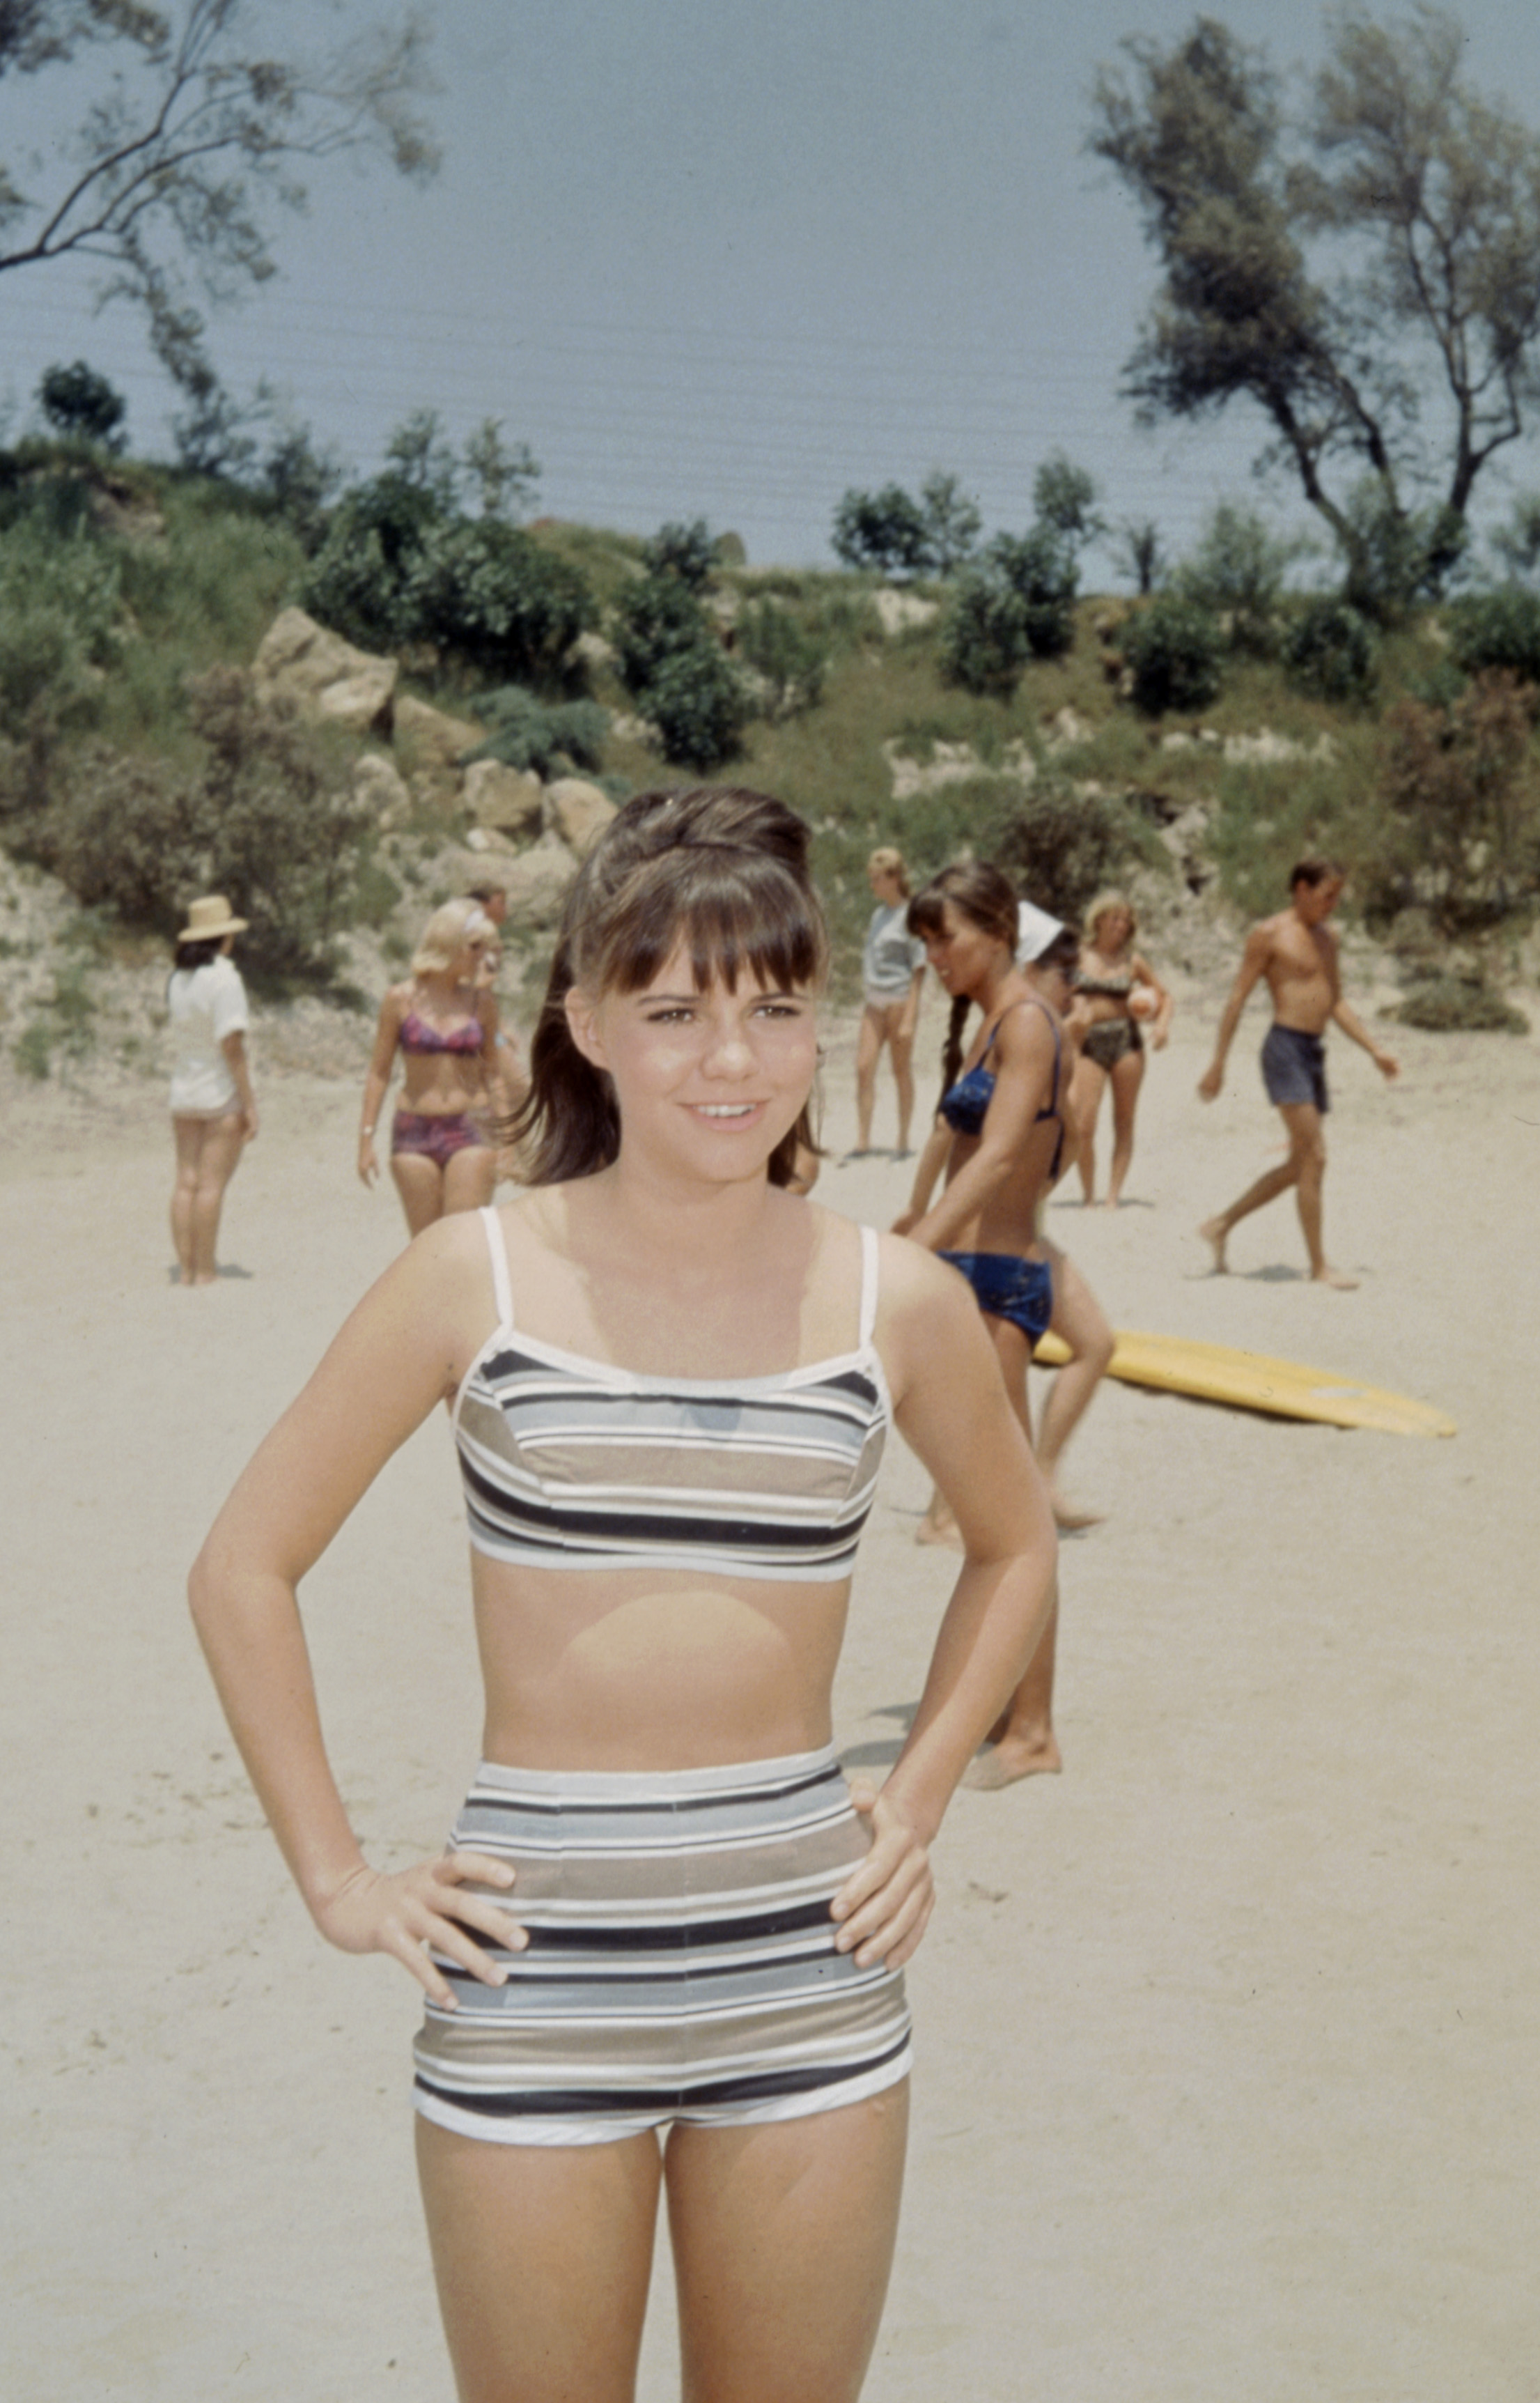 Sally Field appearing in the ABC series "Gidget" on January 1, 1965 | Source: Getty Images